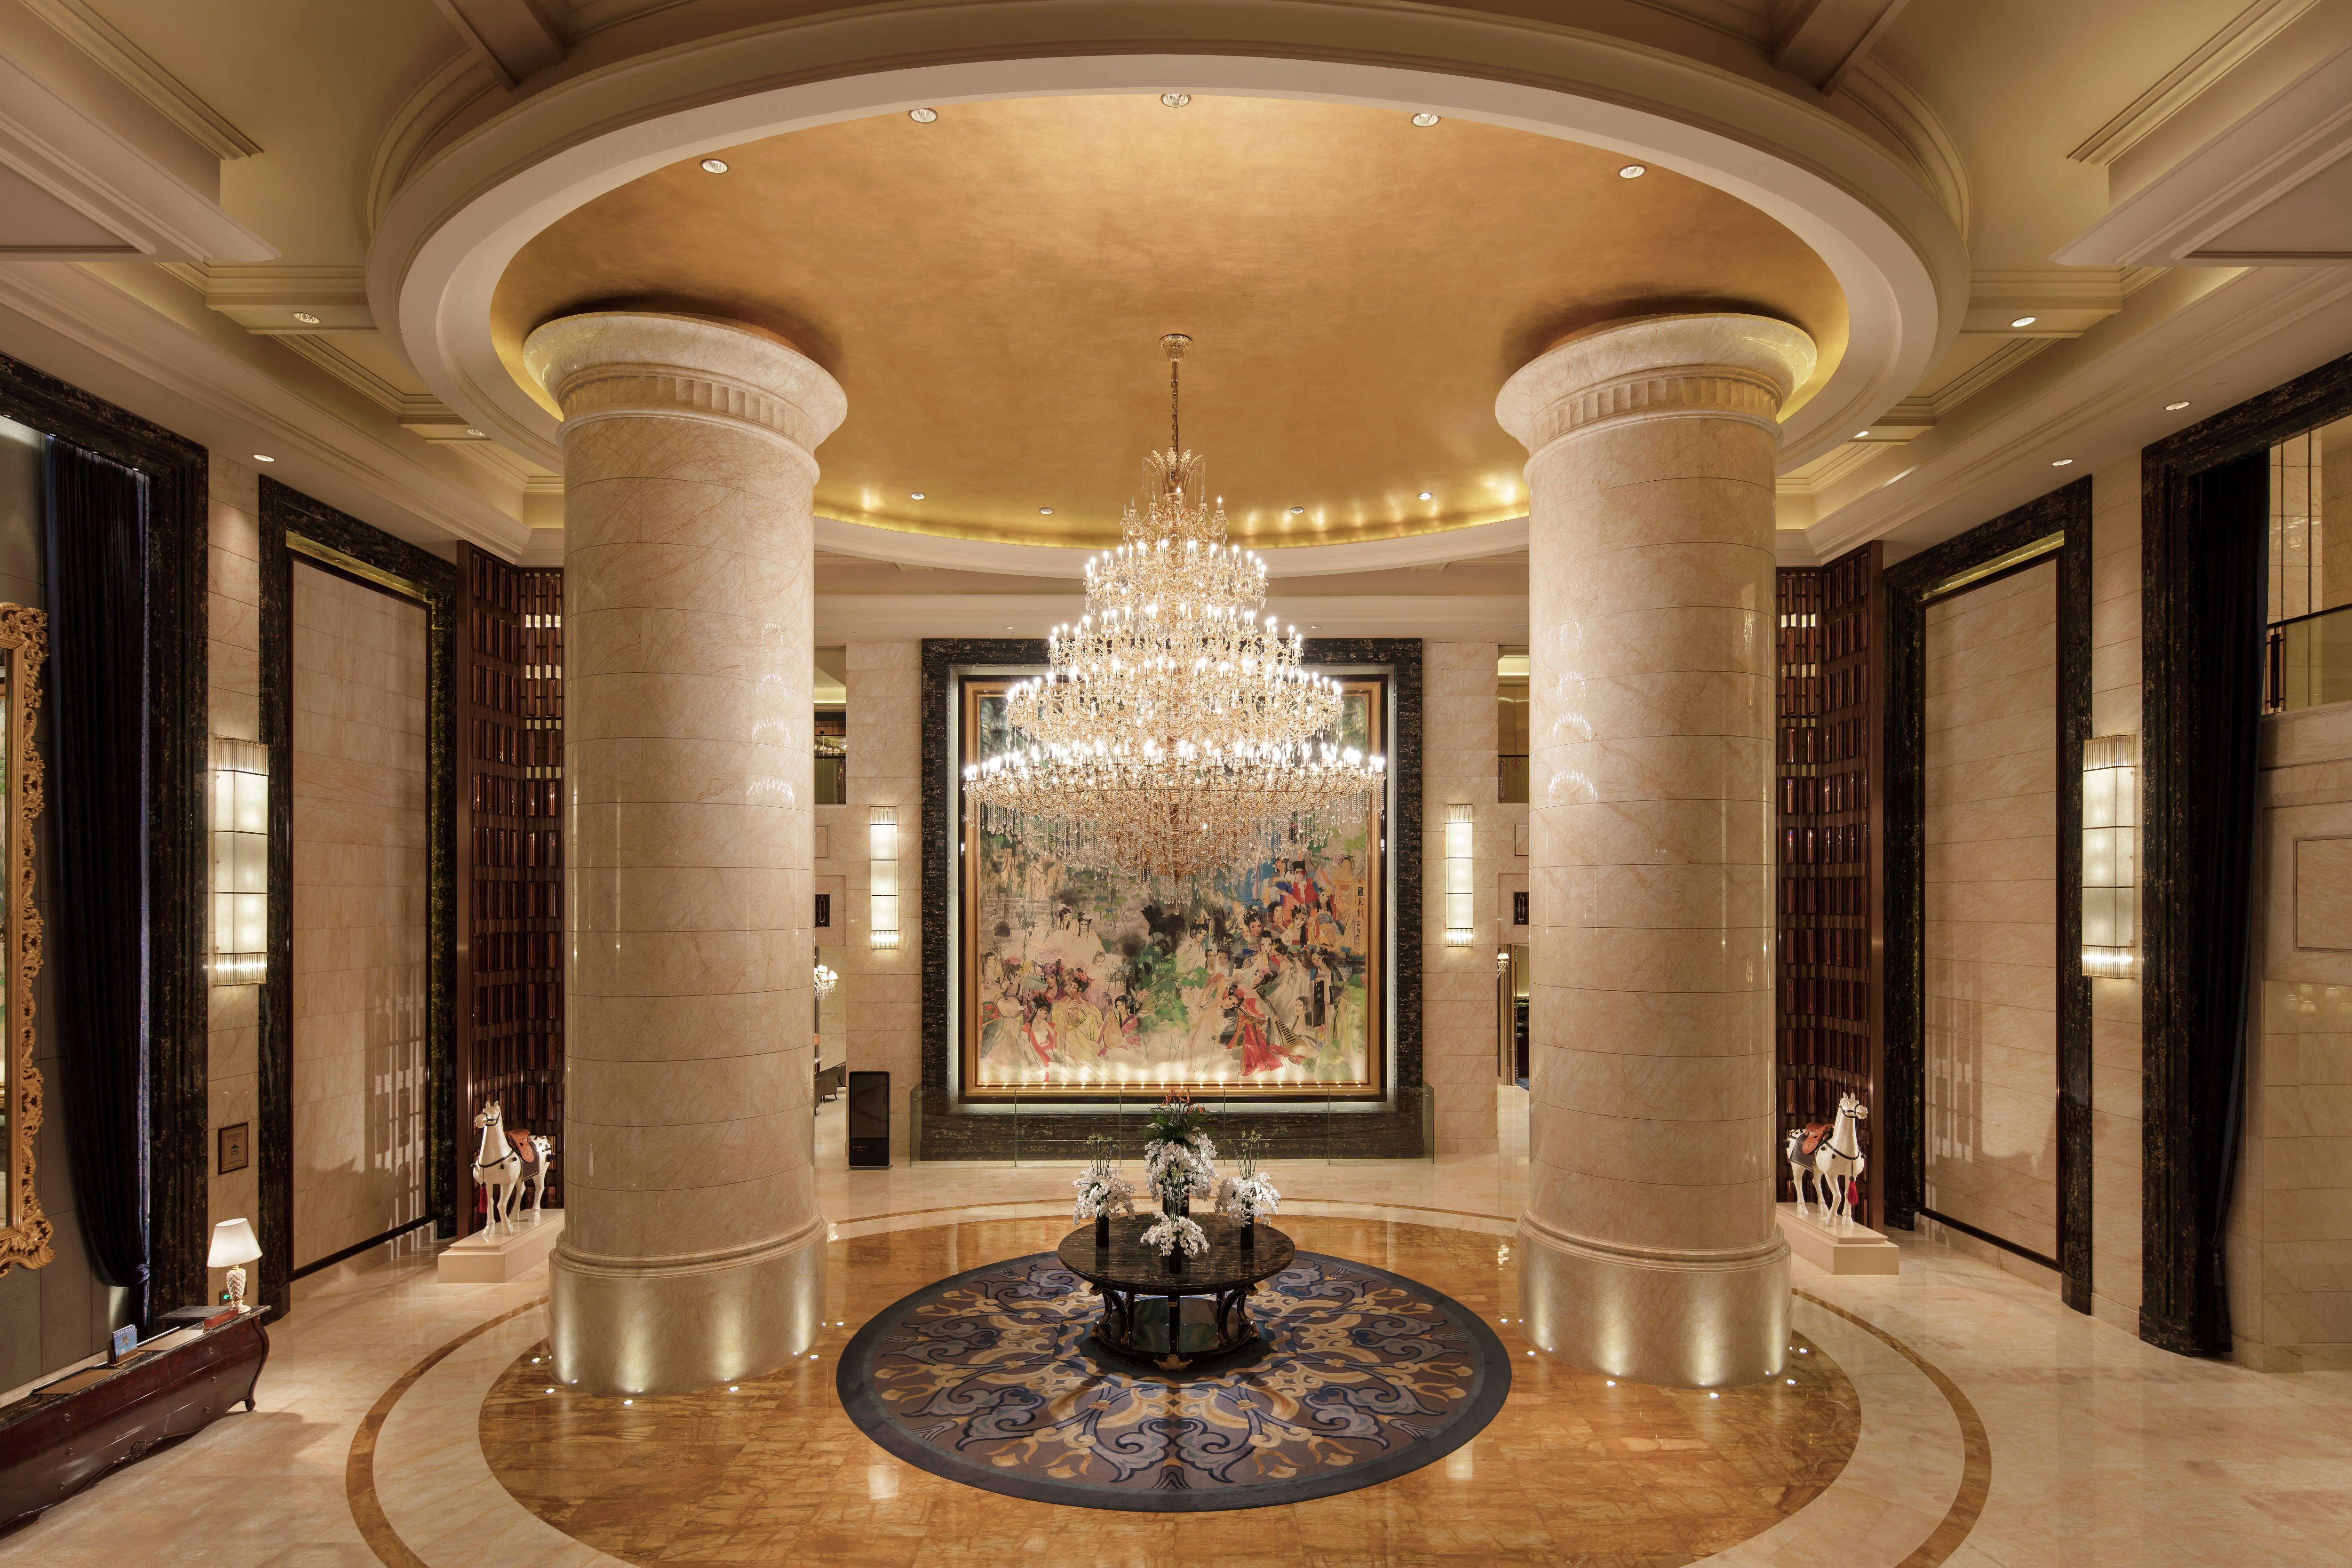 Lobby area with columns and chandelier